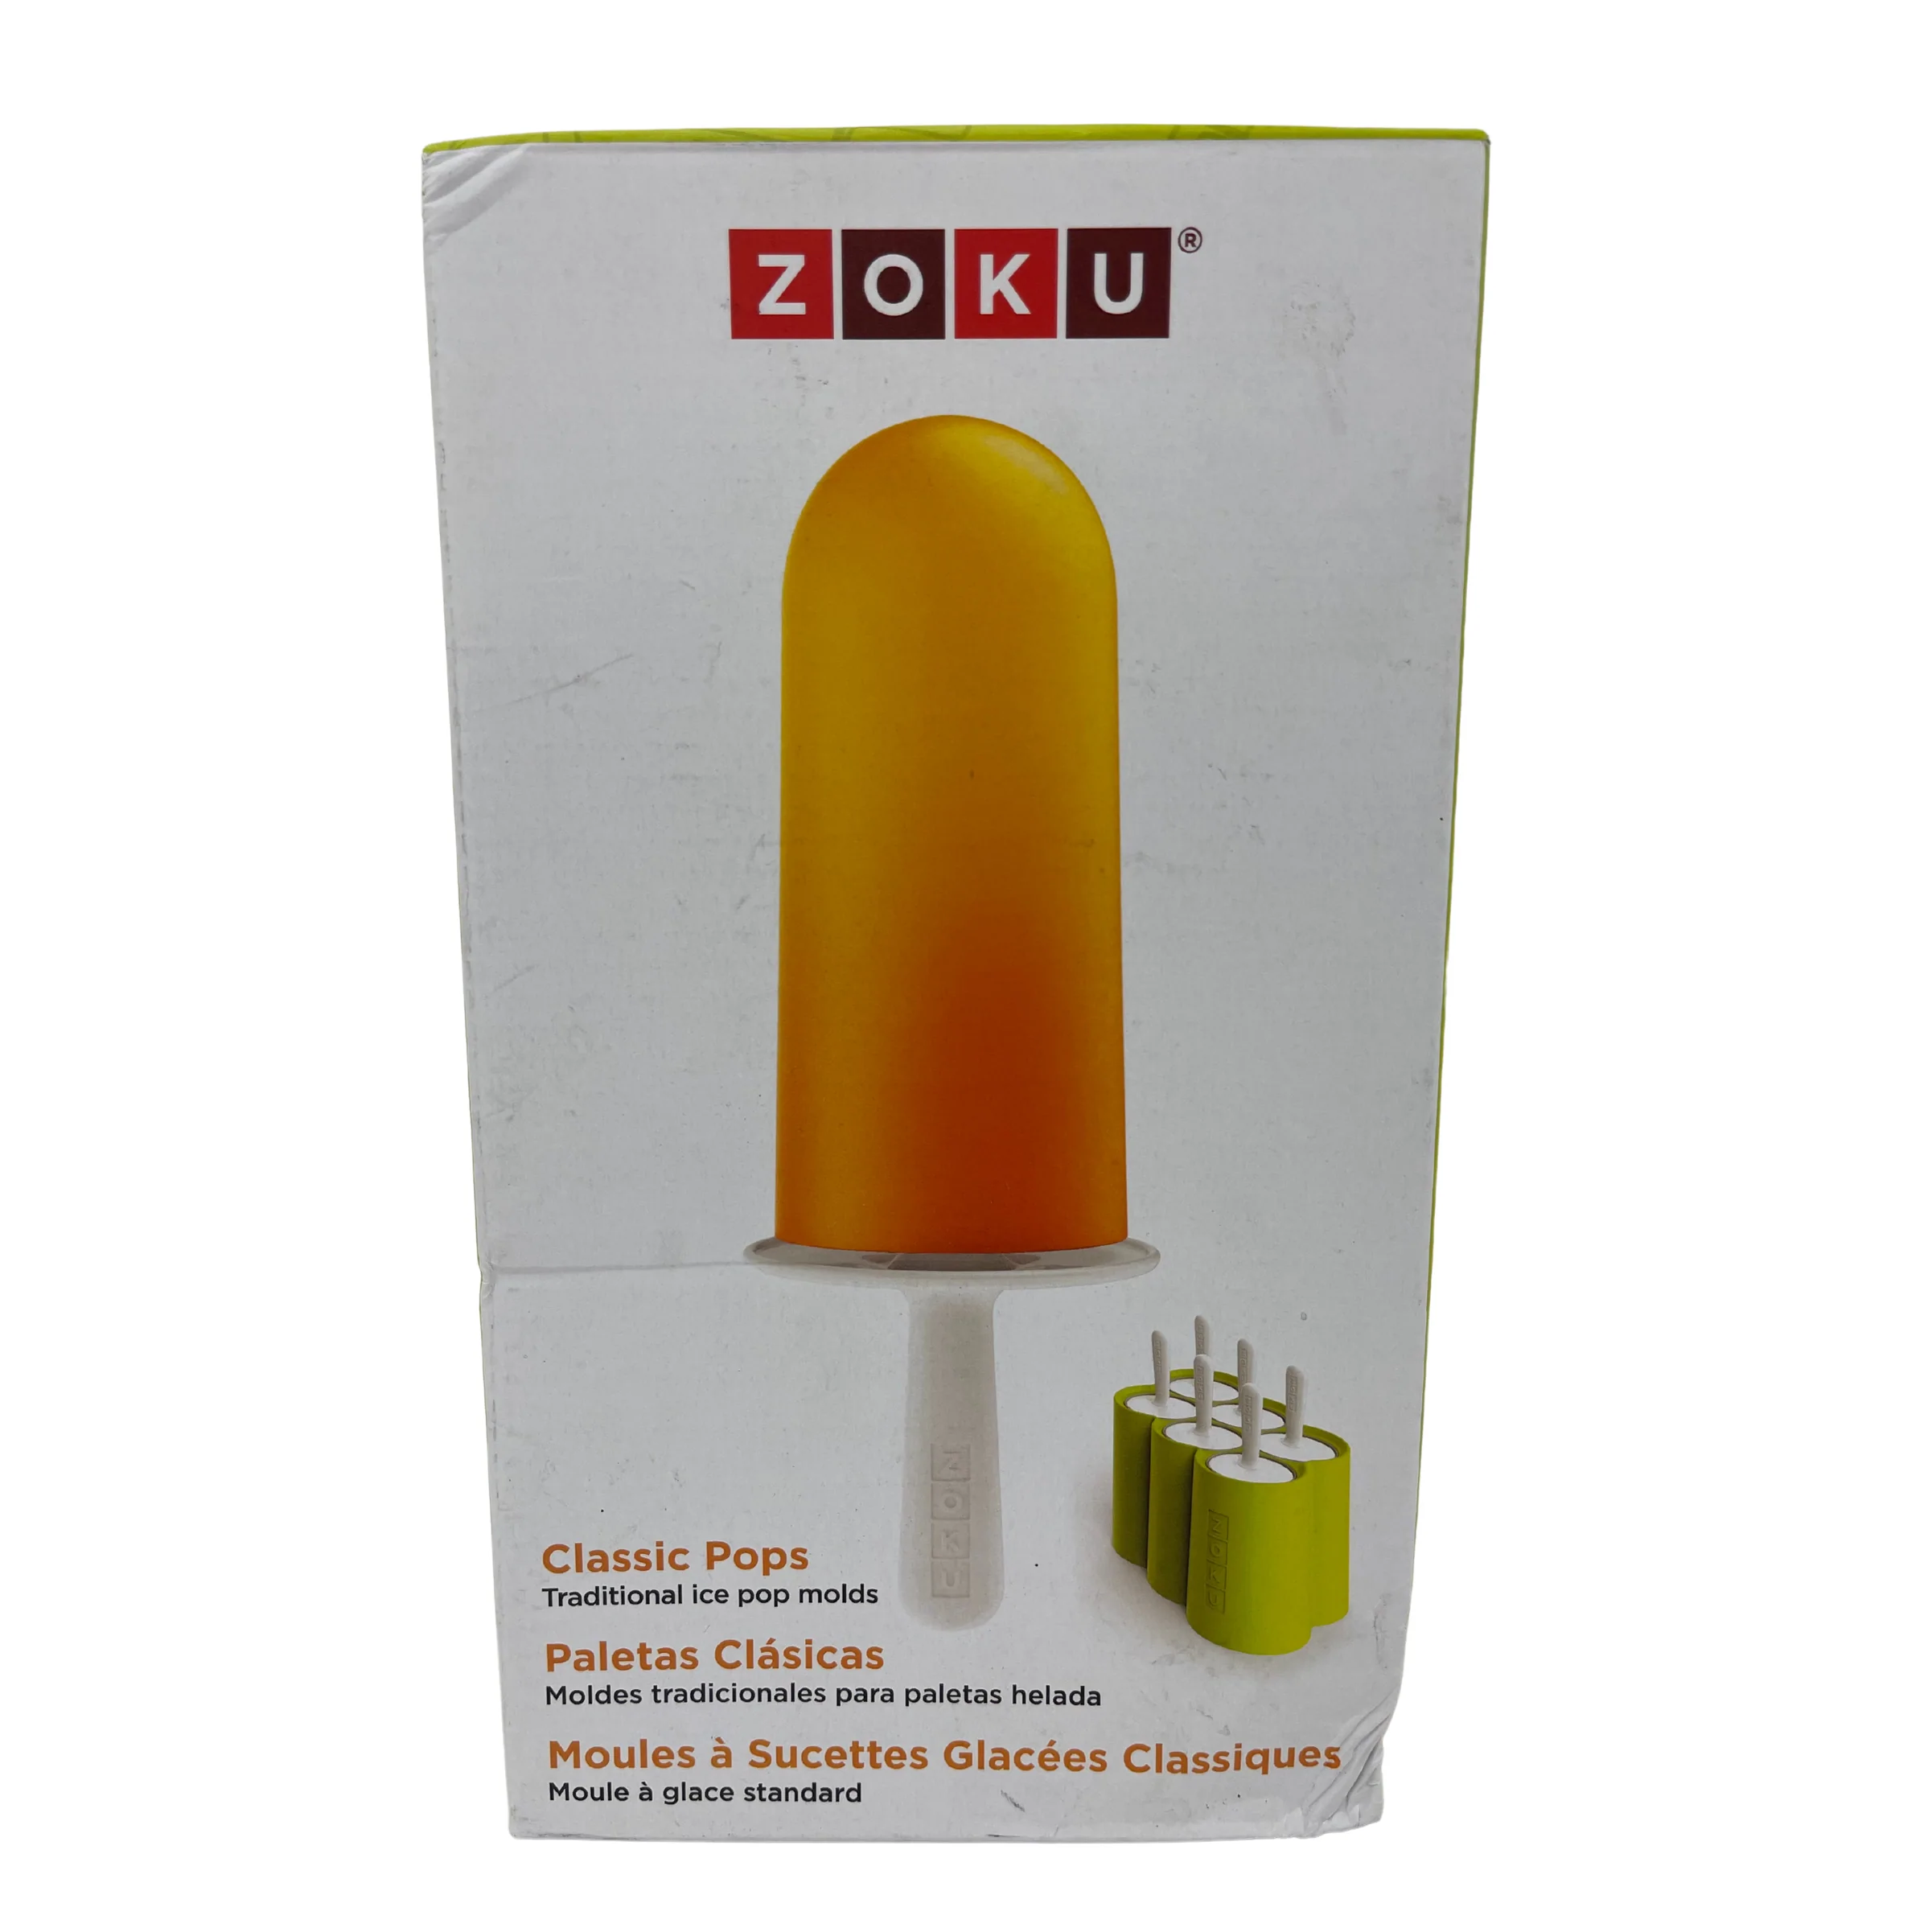 Zoku Classic Pops / Popsicle Mold 6 Pack / DYI Popsicles **DEALS**